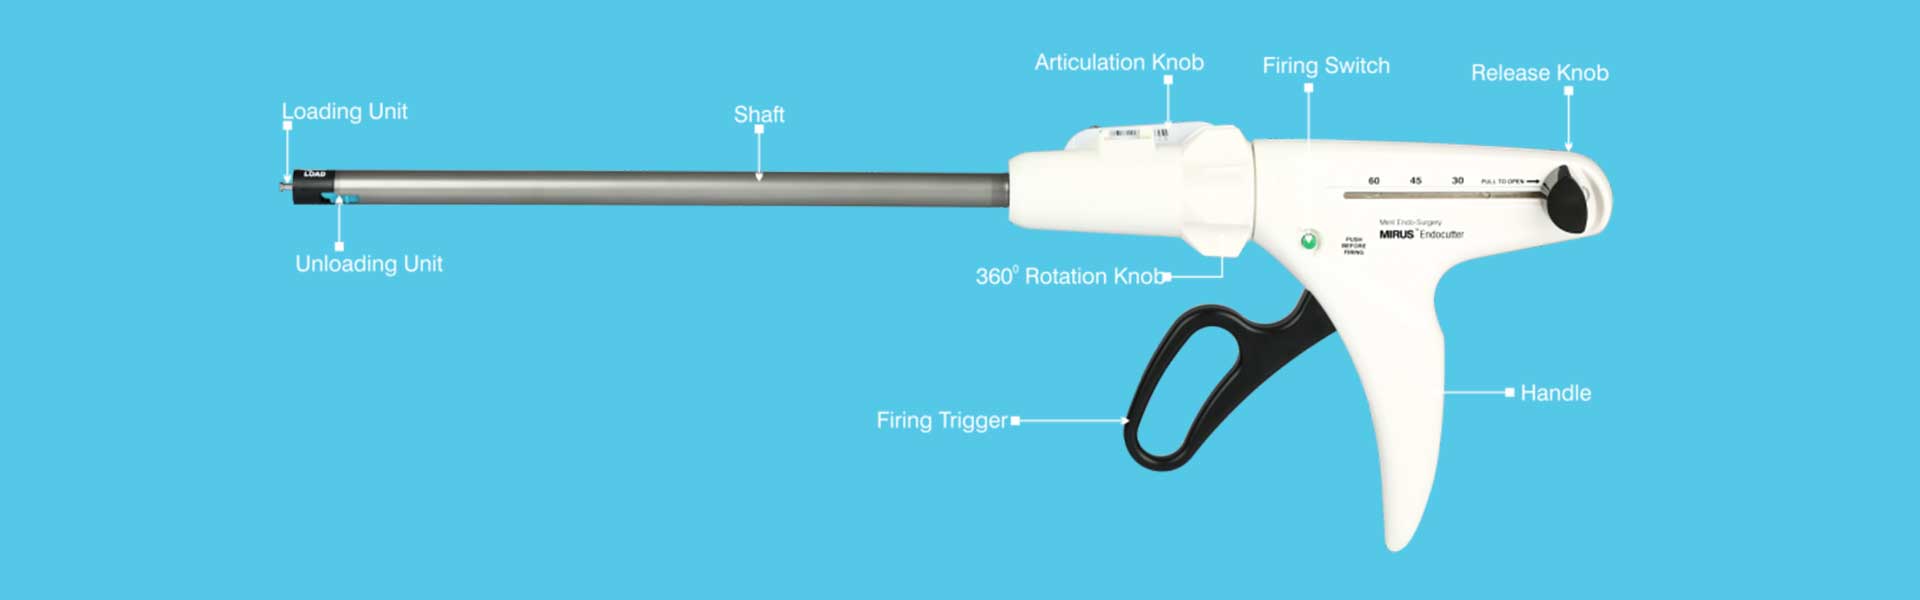 Mirus Endoscopic linear cutter and TRIO reloads